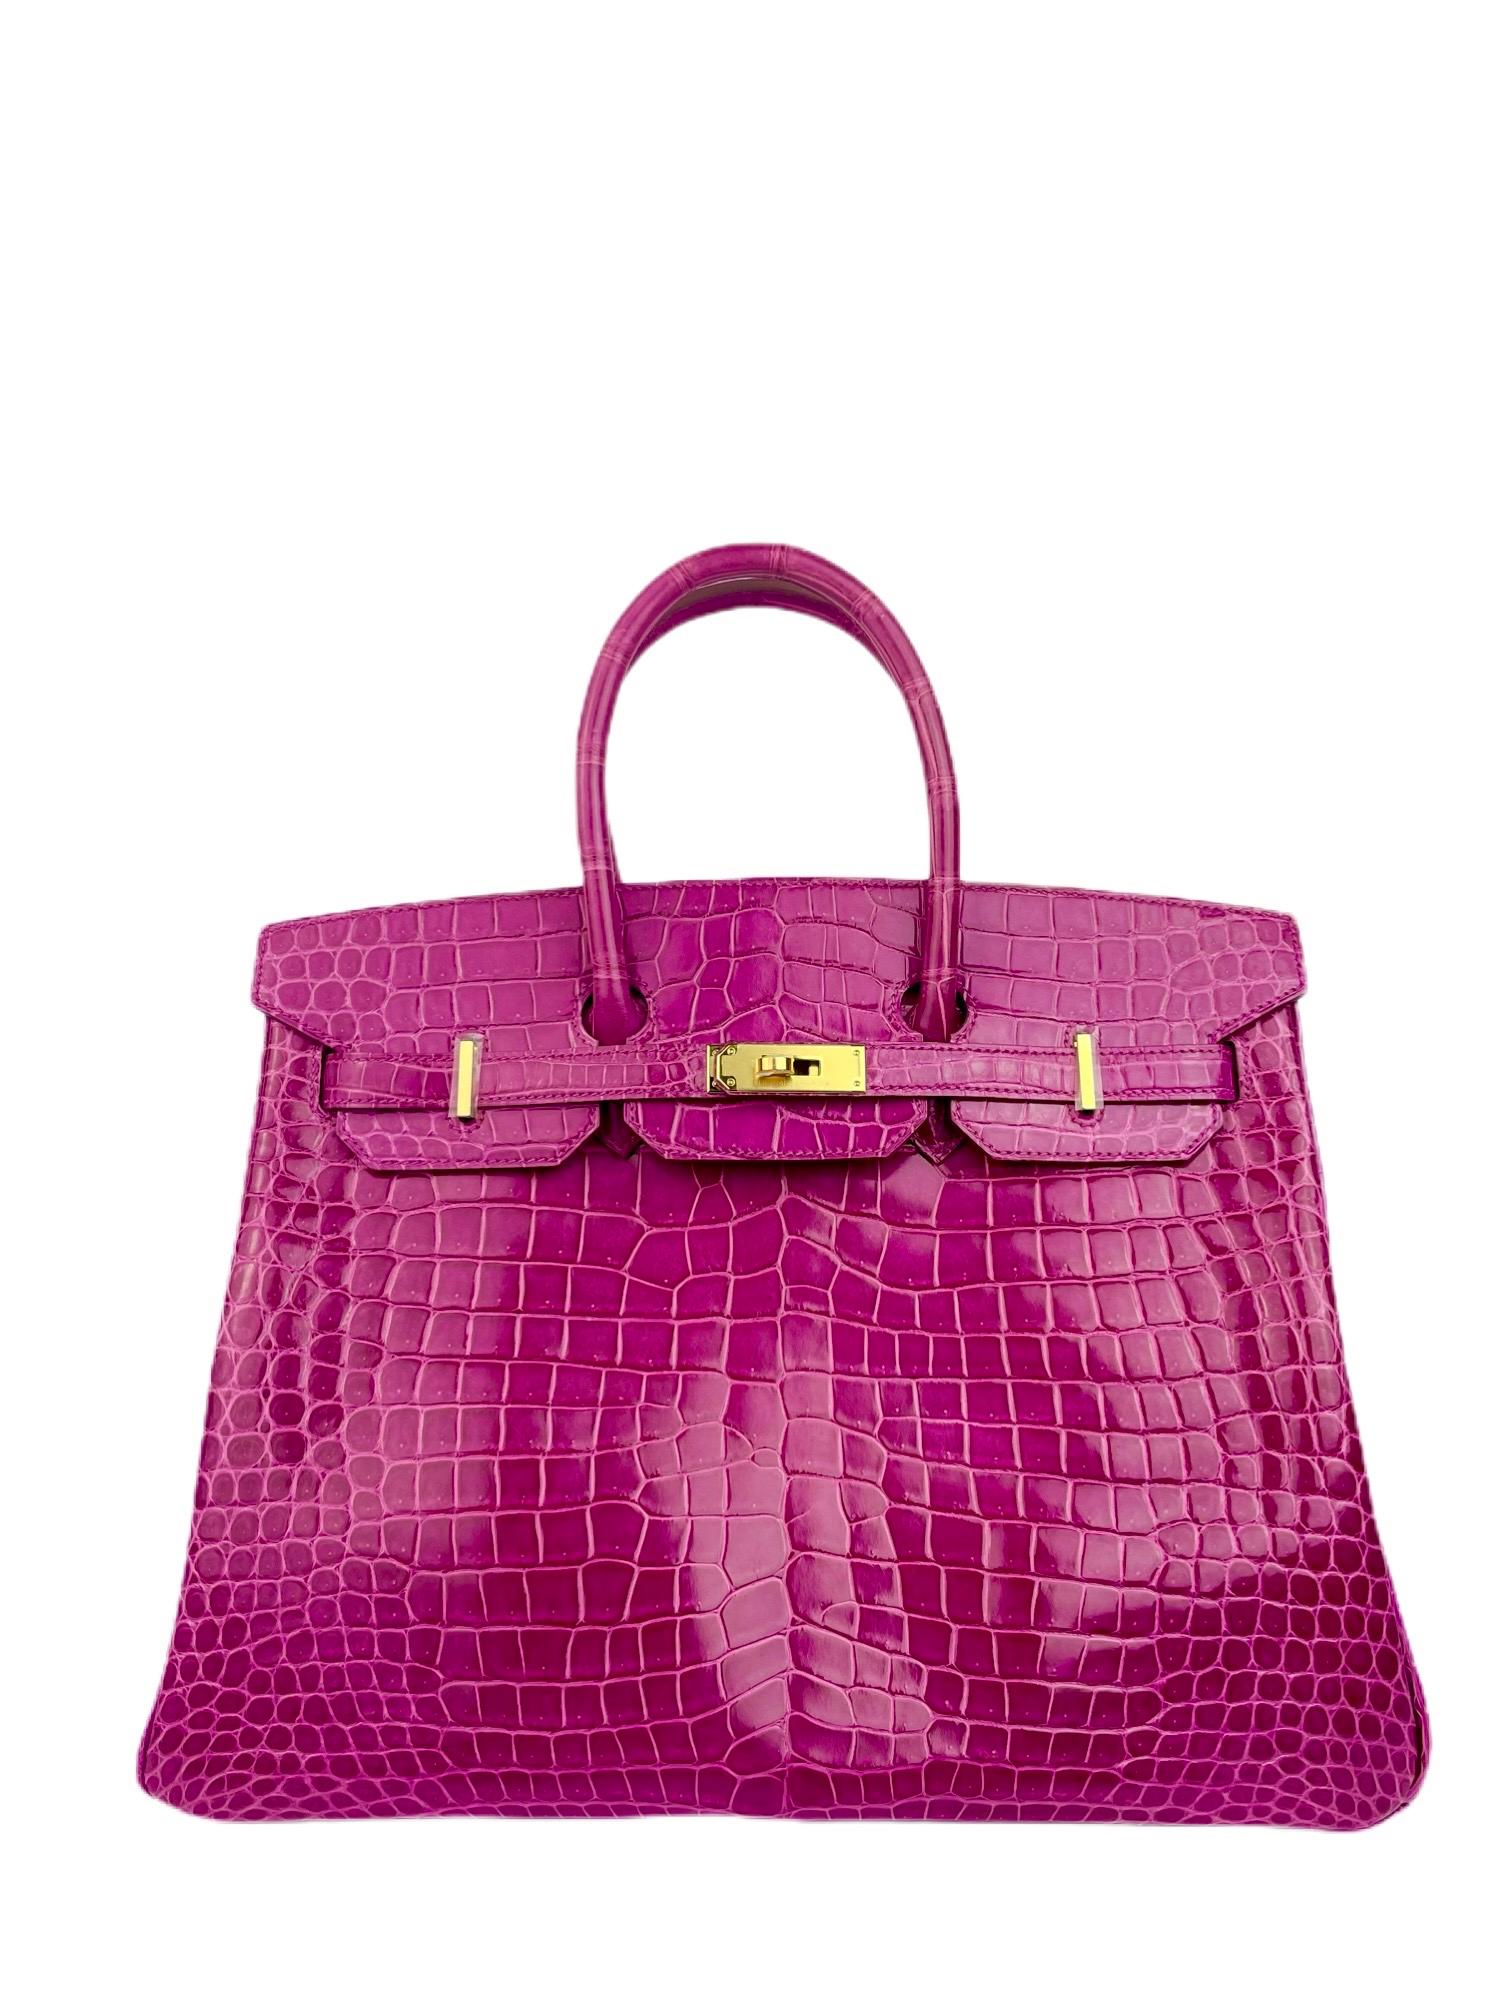 Hermes Birkin 35 Rose Scheherazade Pink Crocodile Gold Hardware. Excellent Pristine Condition, Plastic on Hardware, excellent corners and structure. Best Price! Includes Lock, Clochette and Dust Bag. From Collectors Closet.

Shop with Confidence